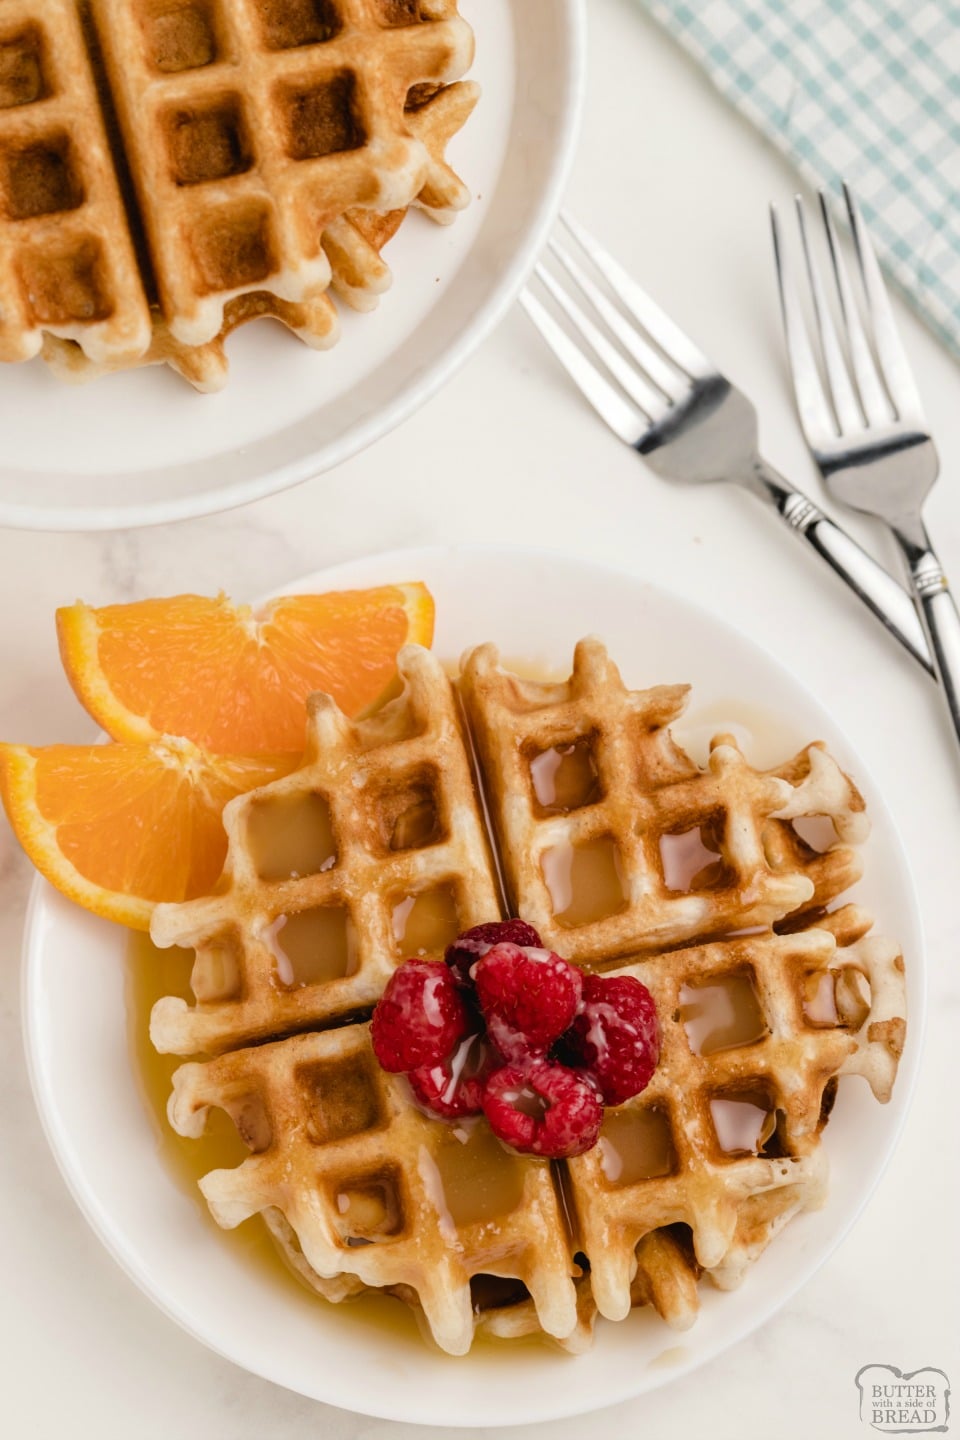 Vanilla Orange Waffles are a sweet citrus waffle served with homemade vanilla butter syrup. Fantastic variation on a traditional waffle recipe that everyone loves!